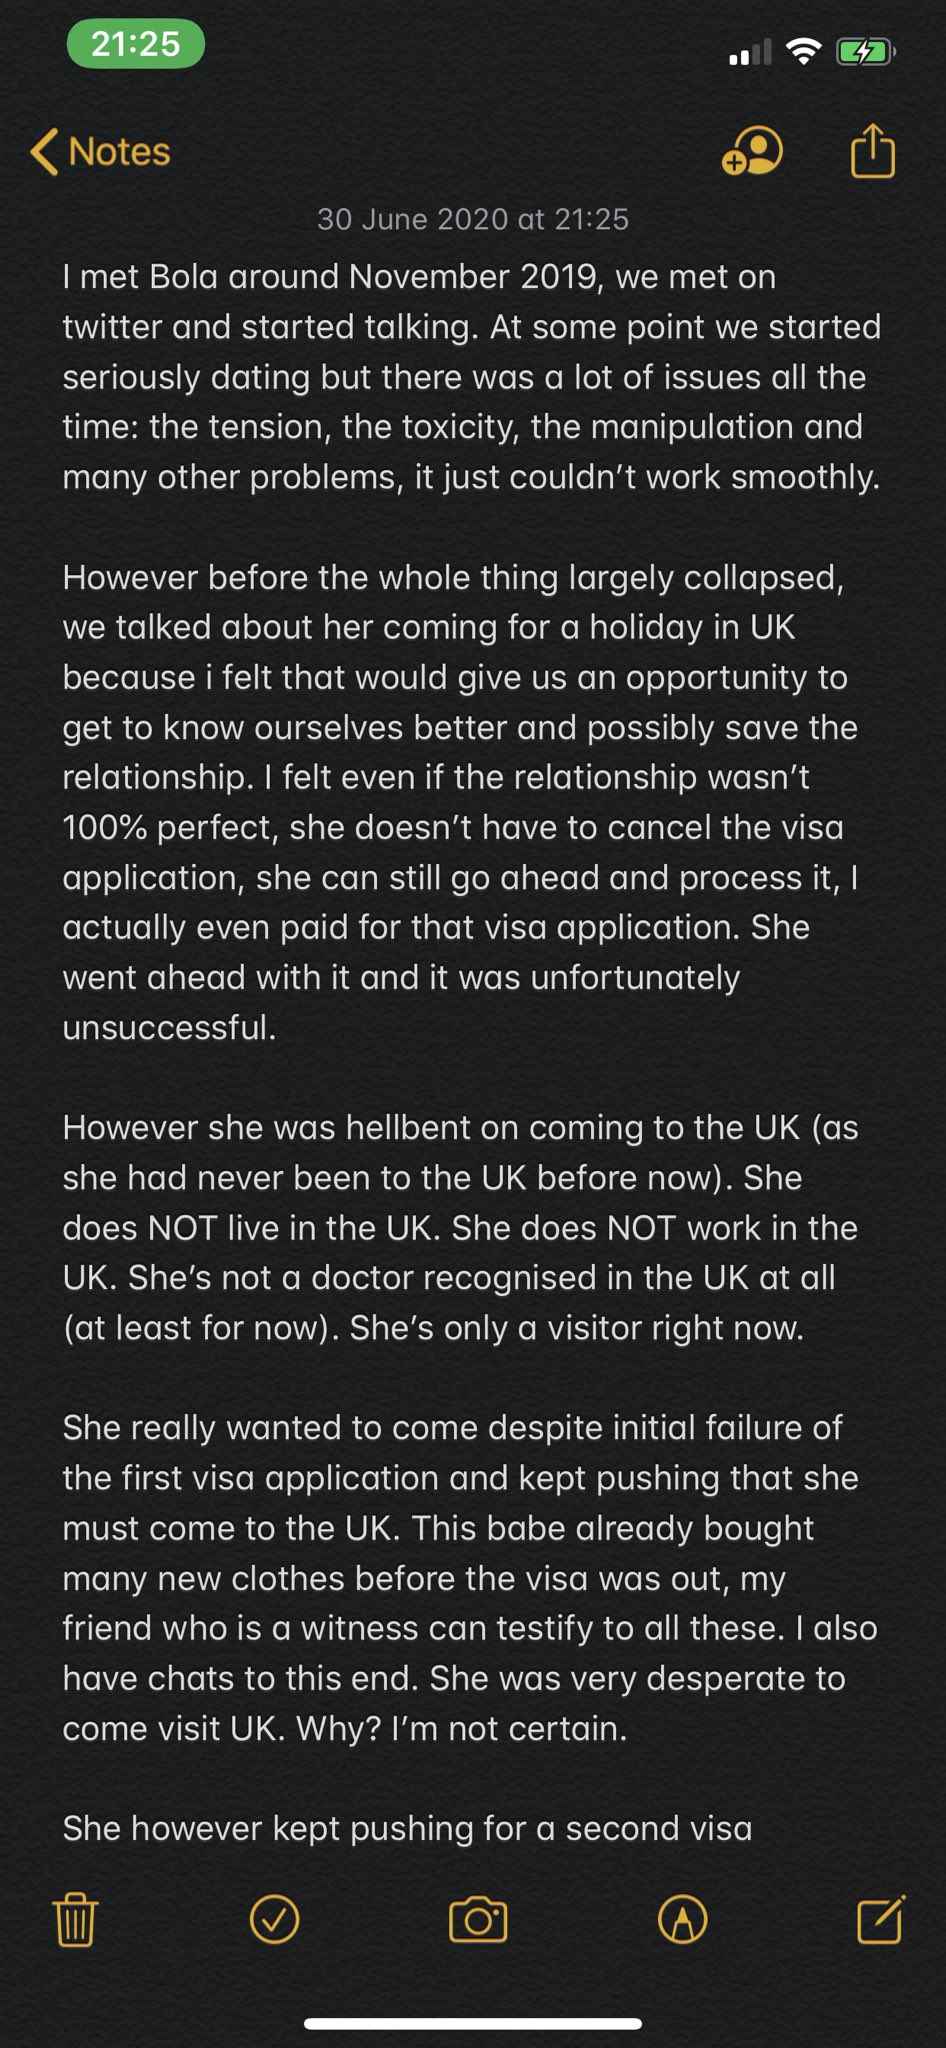 UK Based, Dr. Olufunmilayo Responds To Allegations Made By His Ex ...